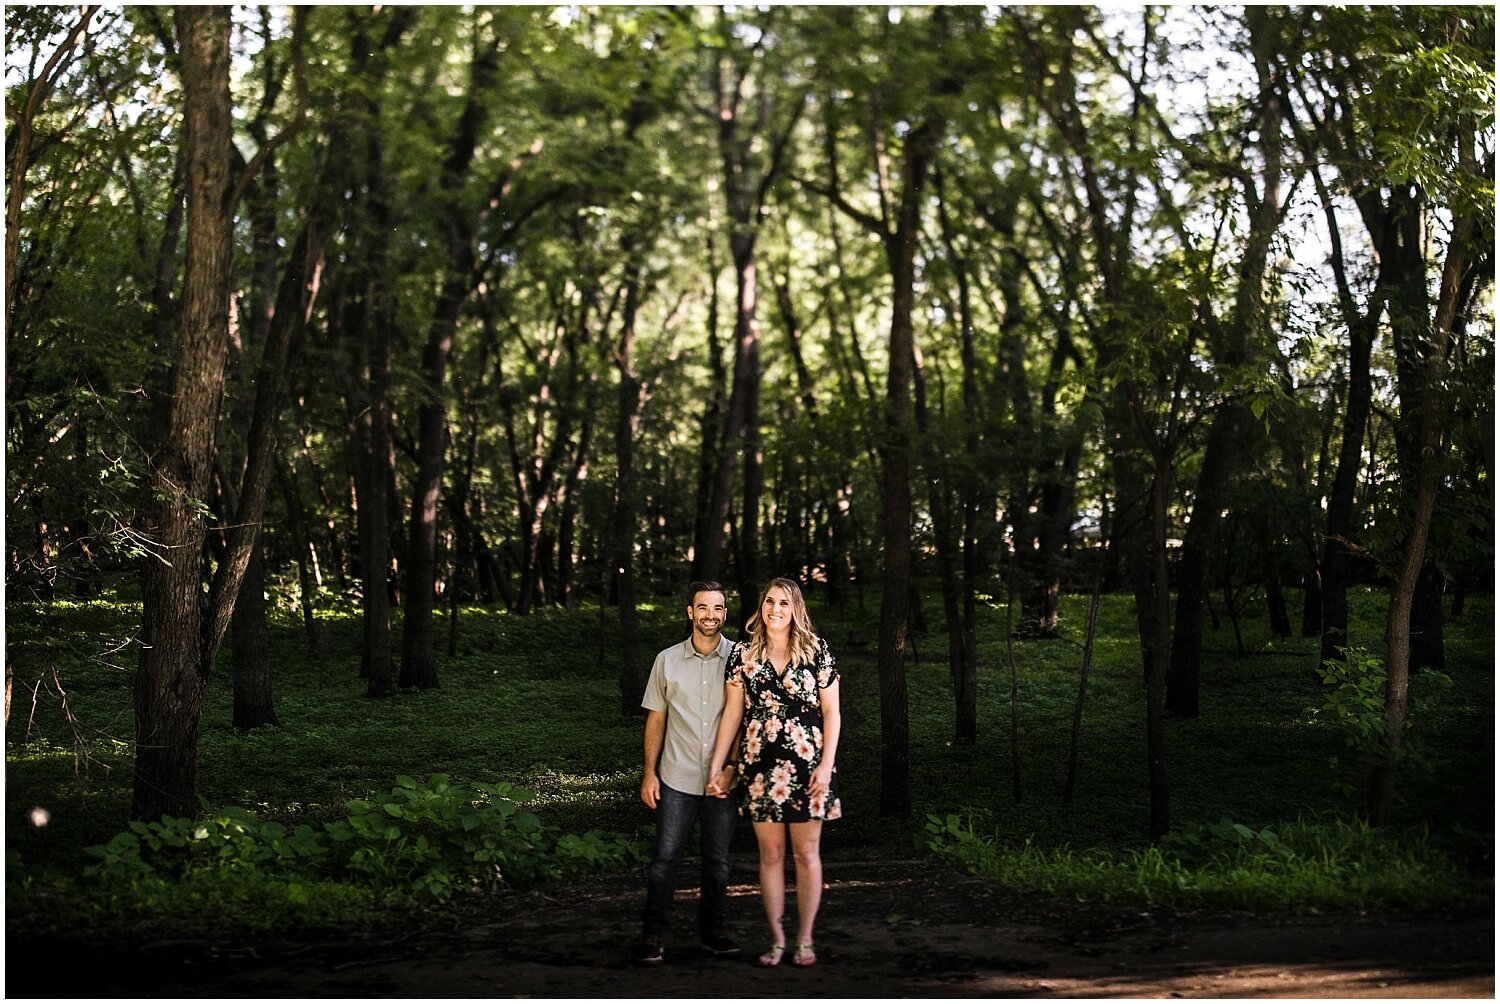  MPLS engagement photo session 